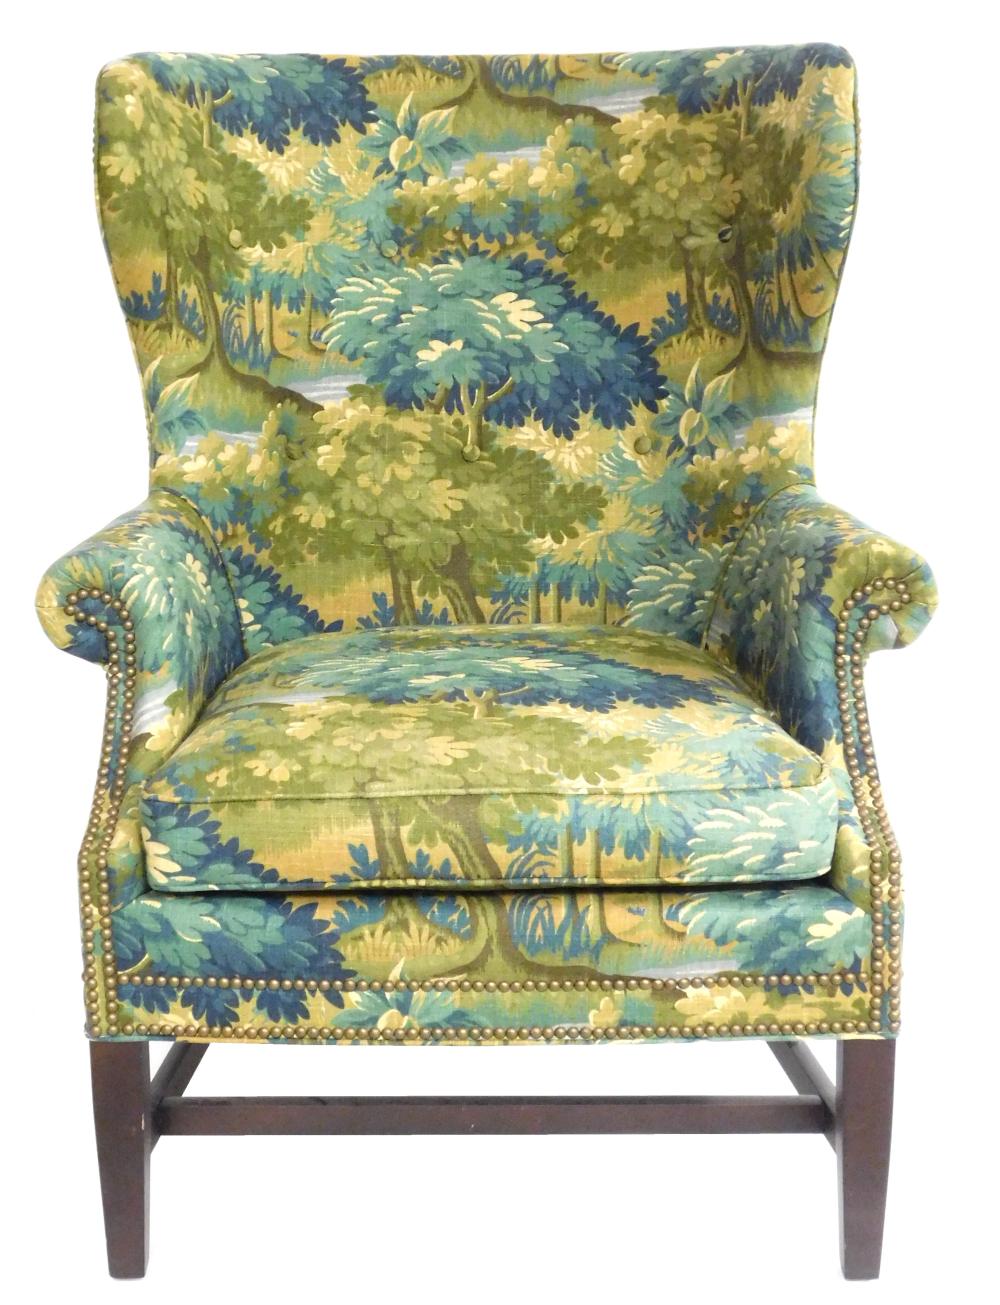 WING CHAIR BY WESLEY HALL, HICKORY,